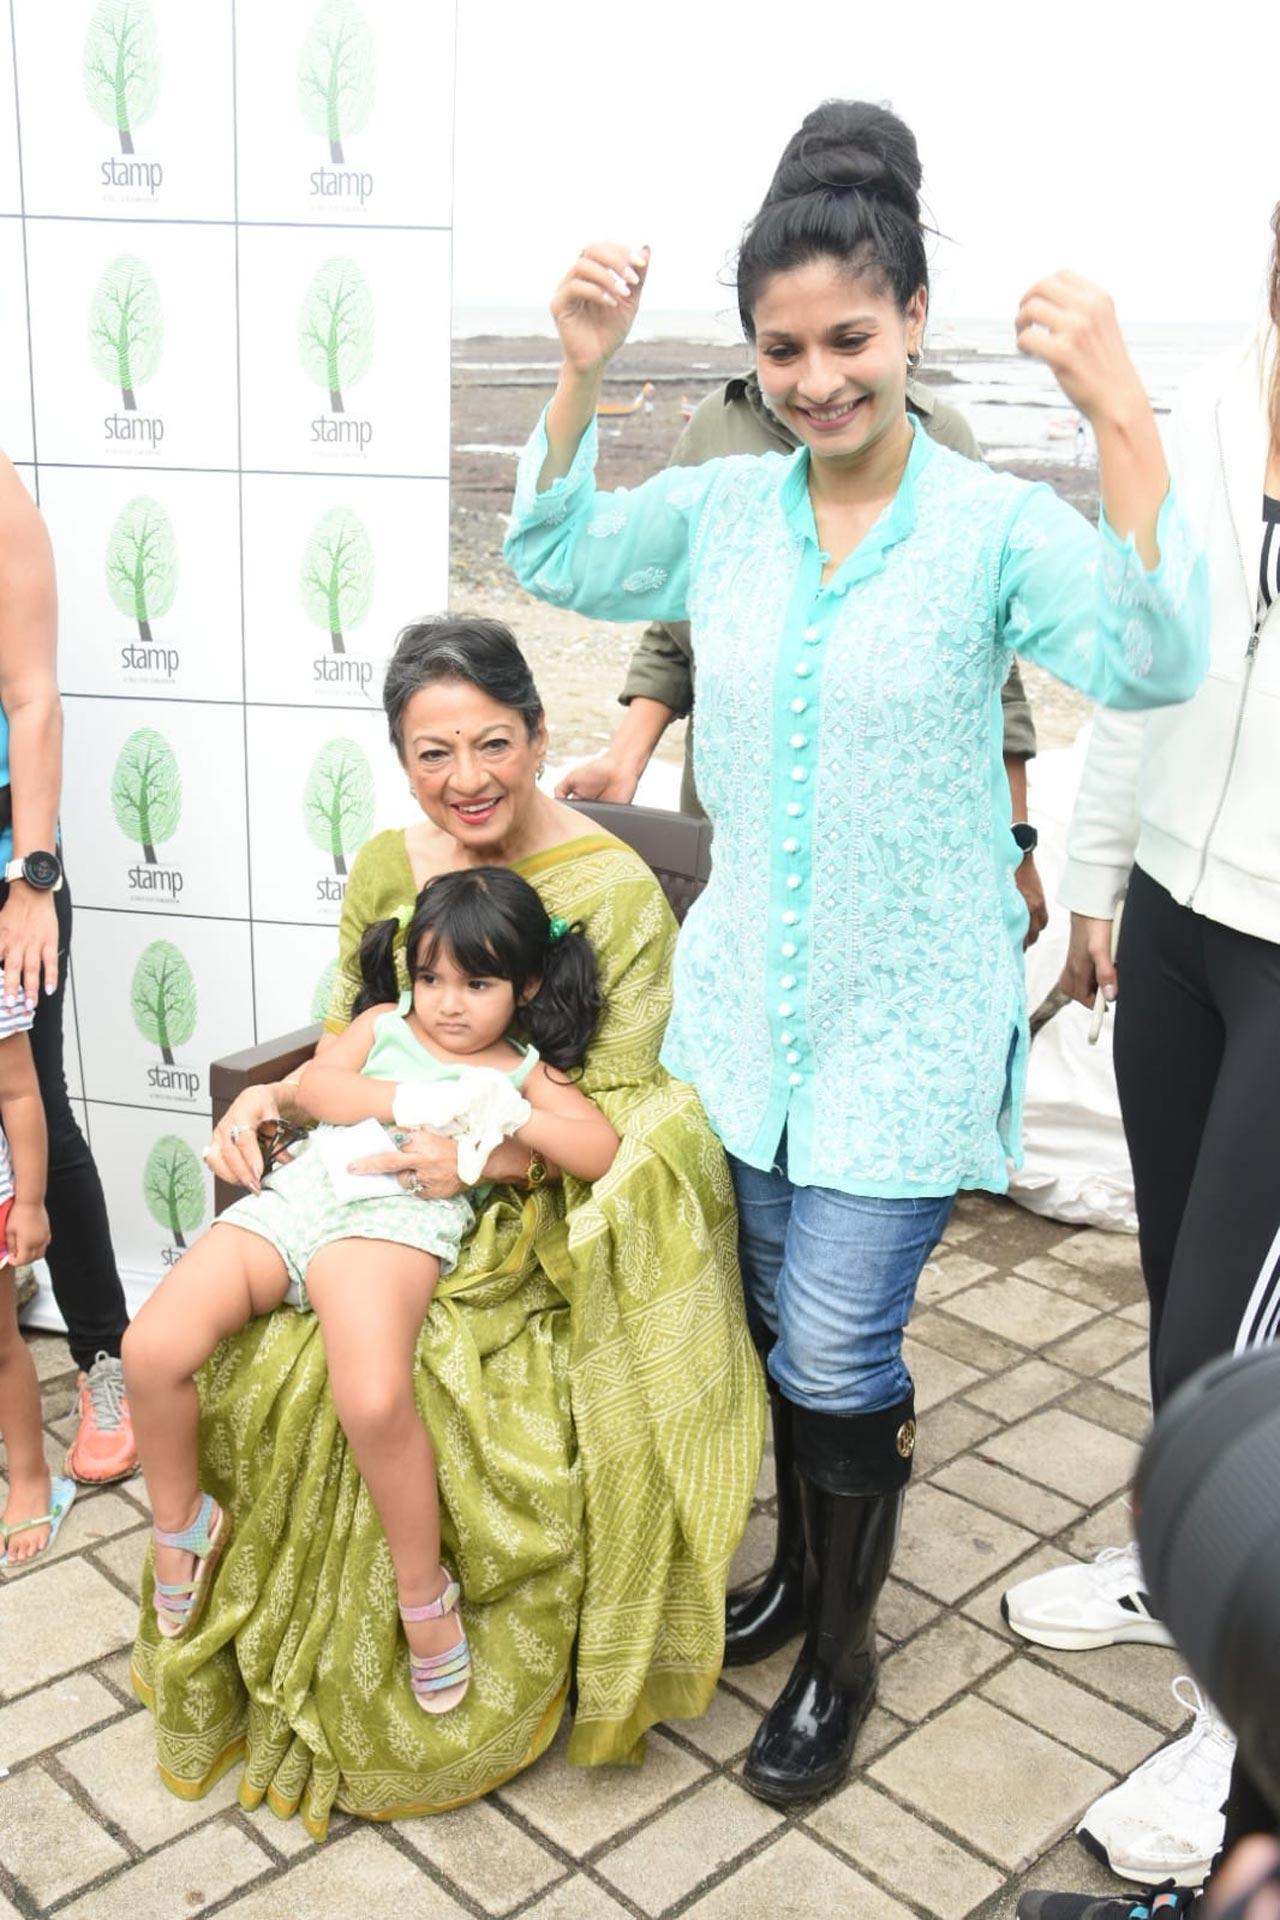 Tanishaa, along with her mother and legendary actor Tanuja Mukherjee were present for this noble cause